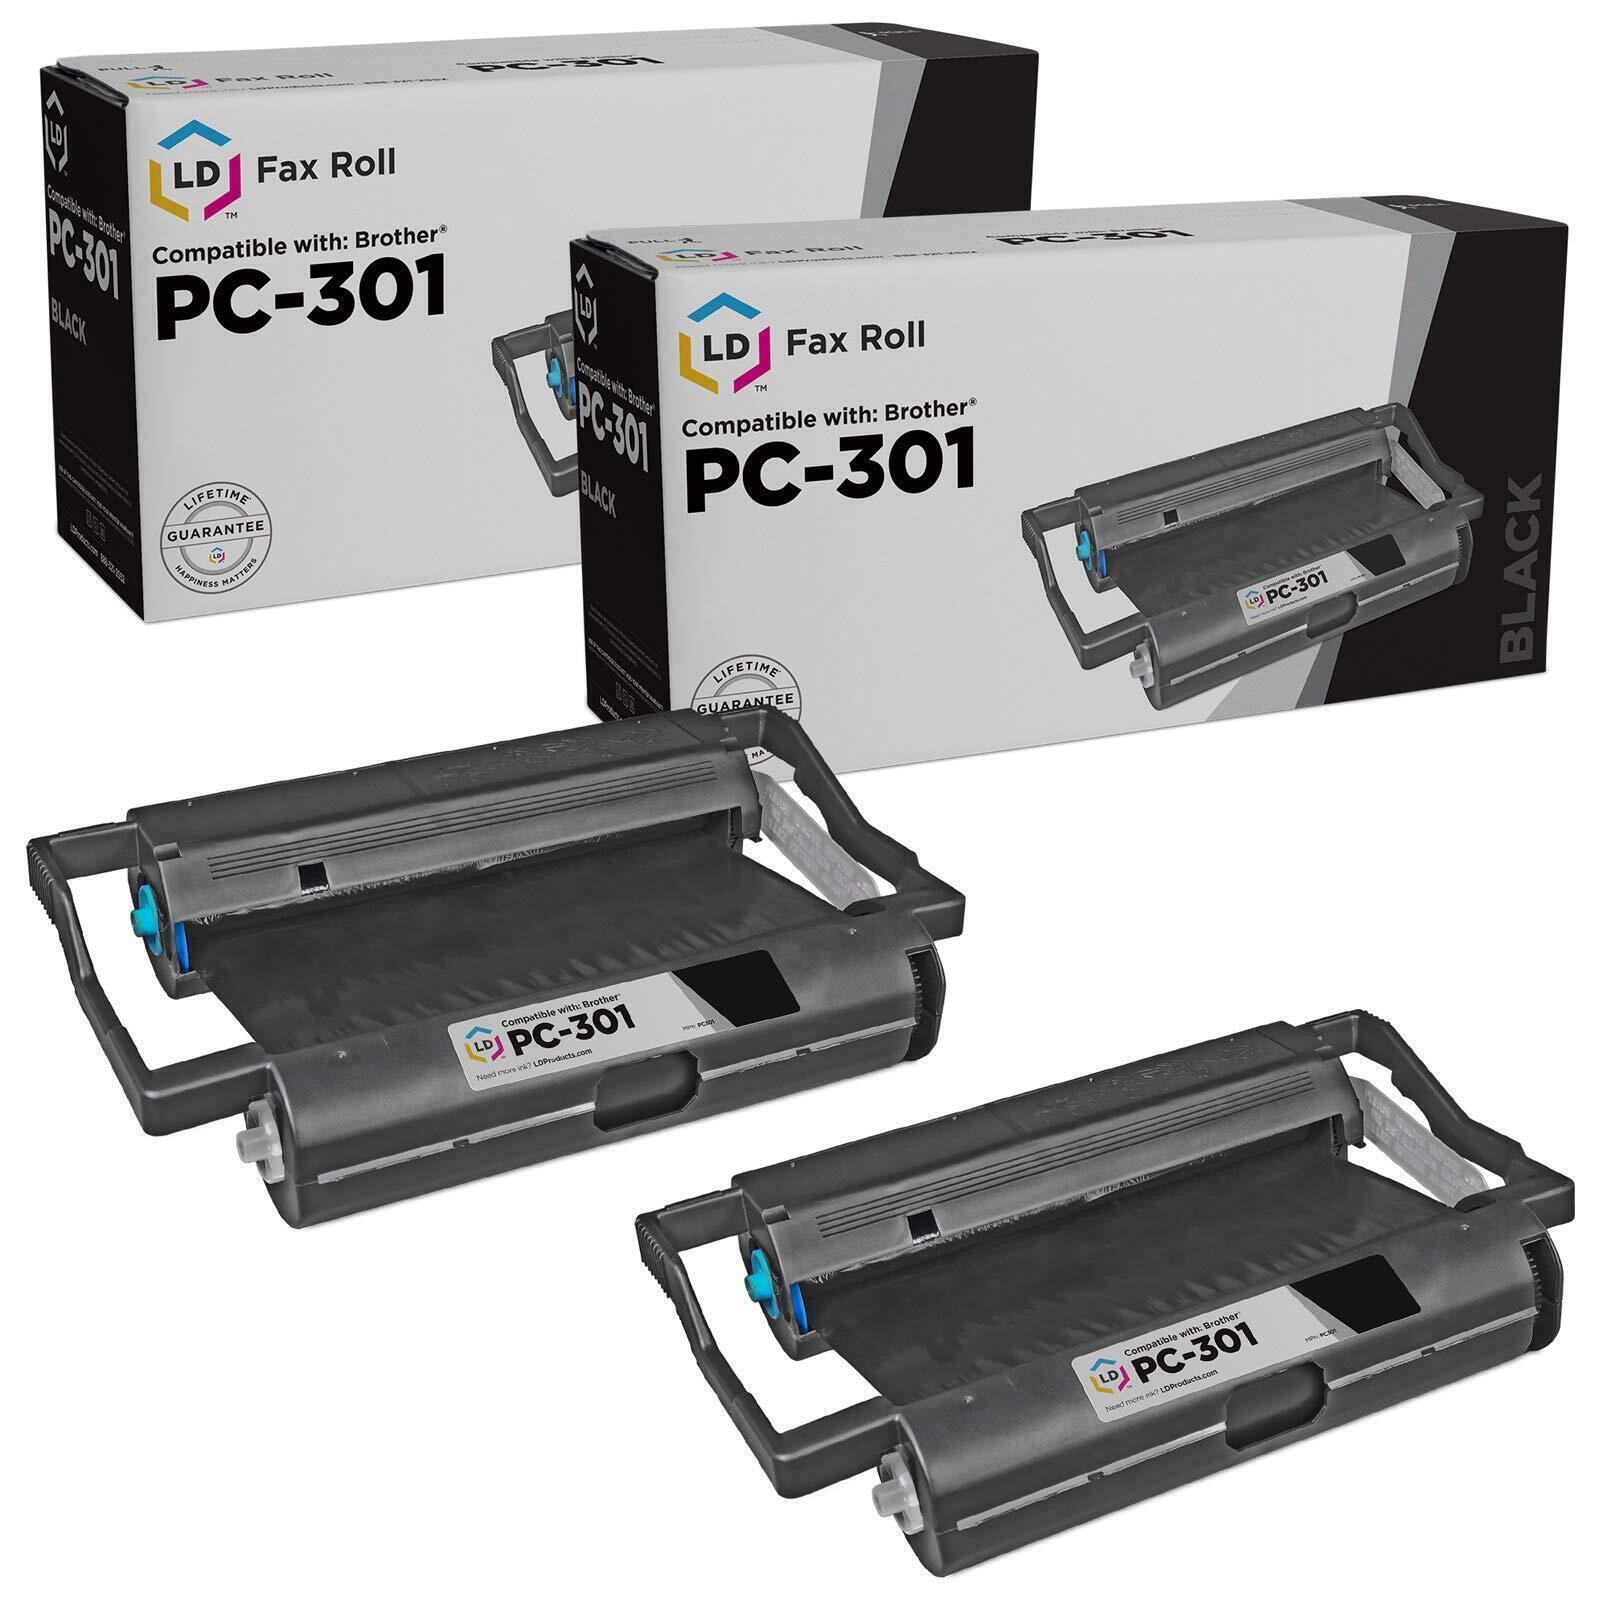 LD Compatible PC301 Set of 2 Fax With Roll for Brother 750 770 775 870 MFC-970MC